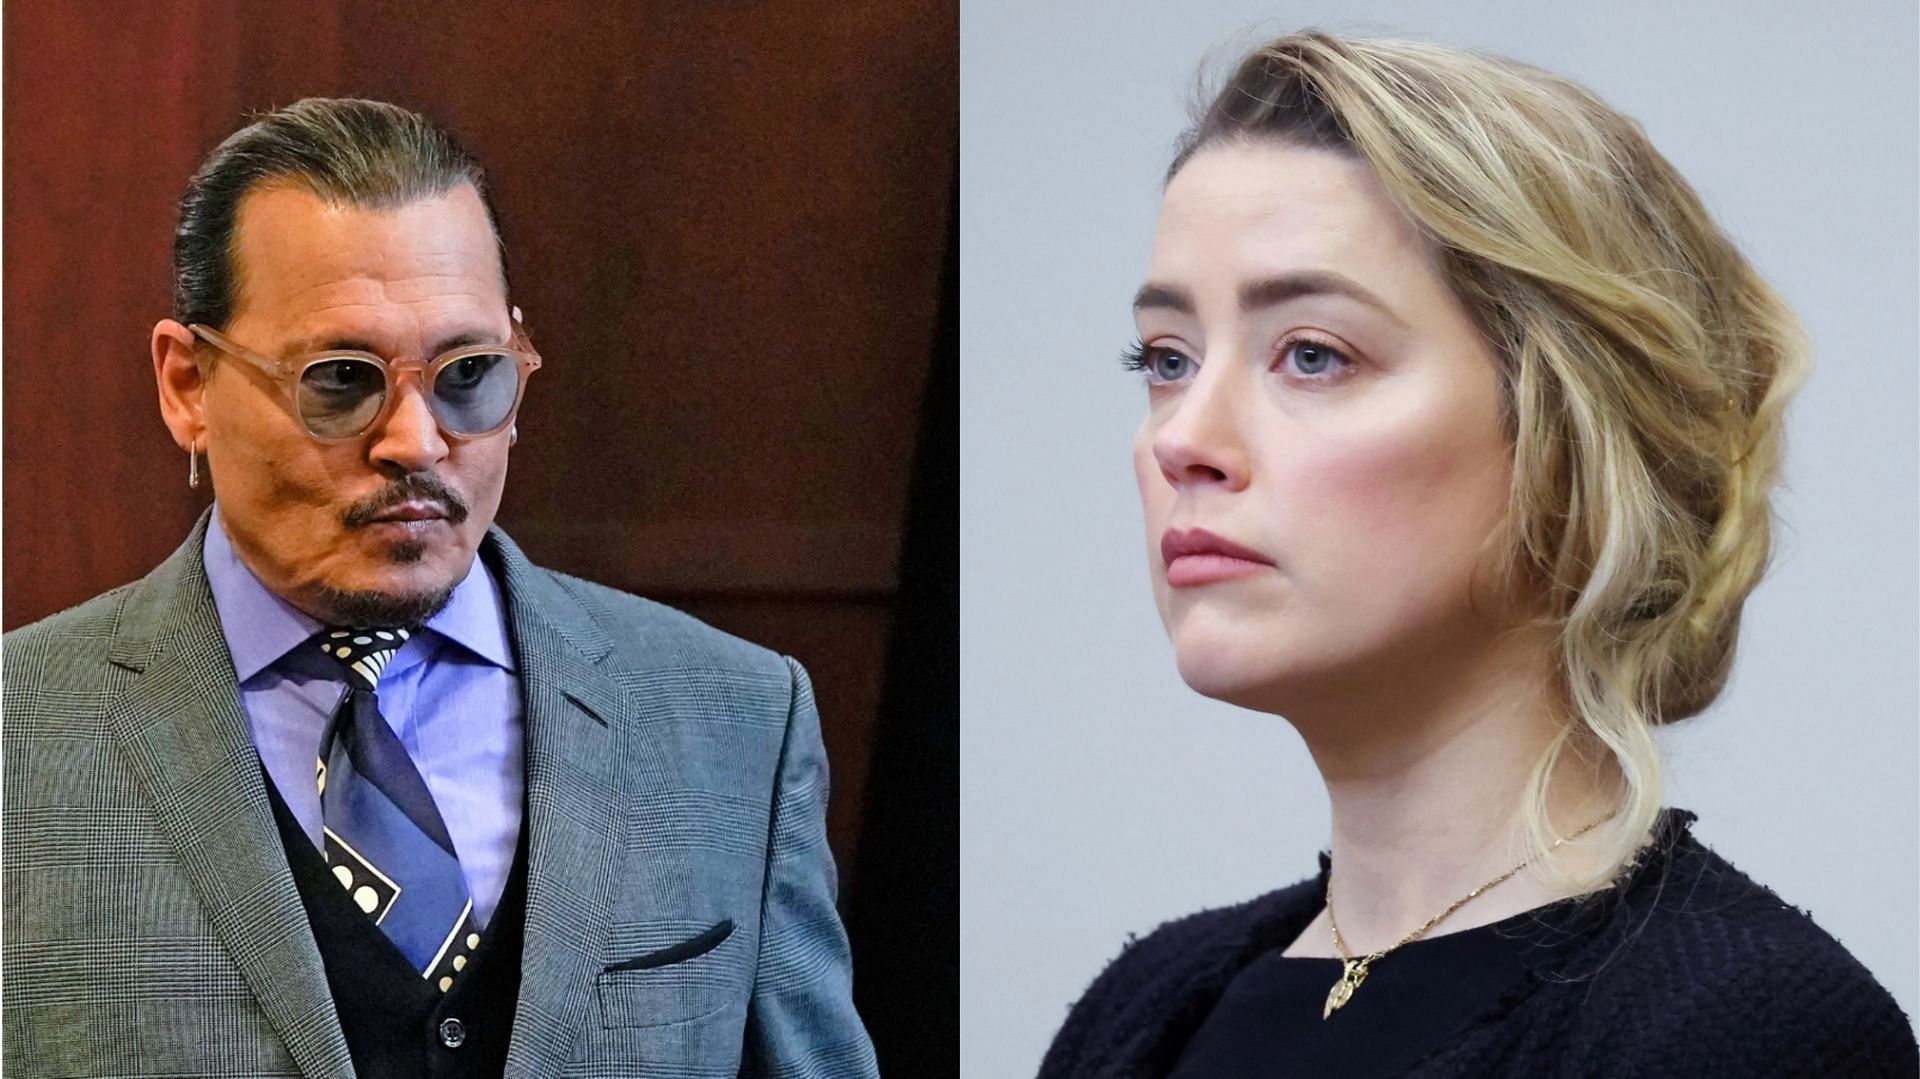 Amber Heard&#039;s lawyer stated that she would appeal the verdict, which was announced on June 1. (Image via Getty Images)